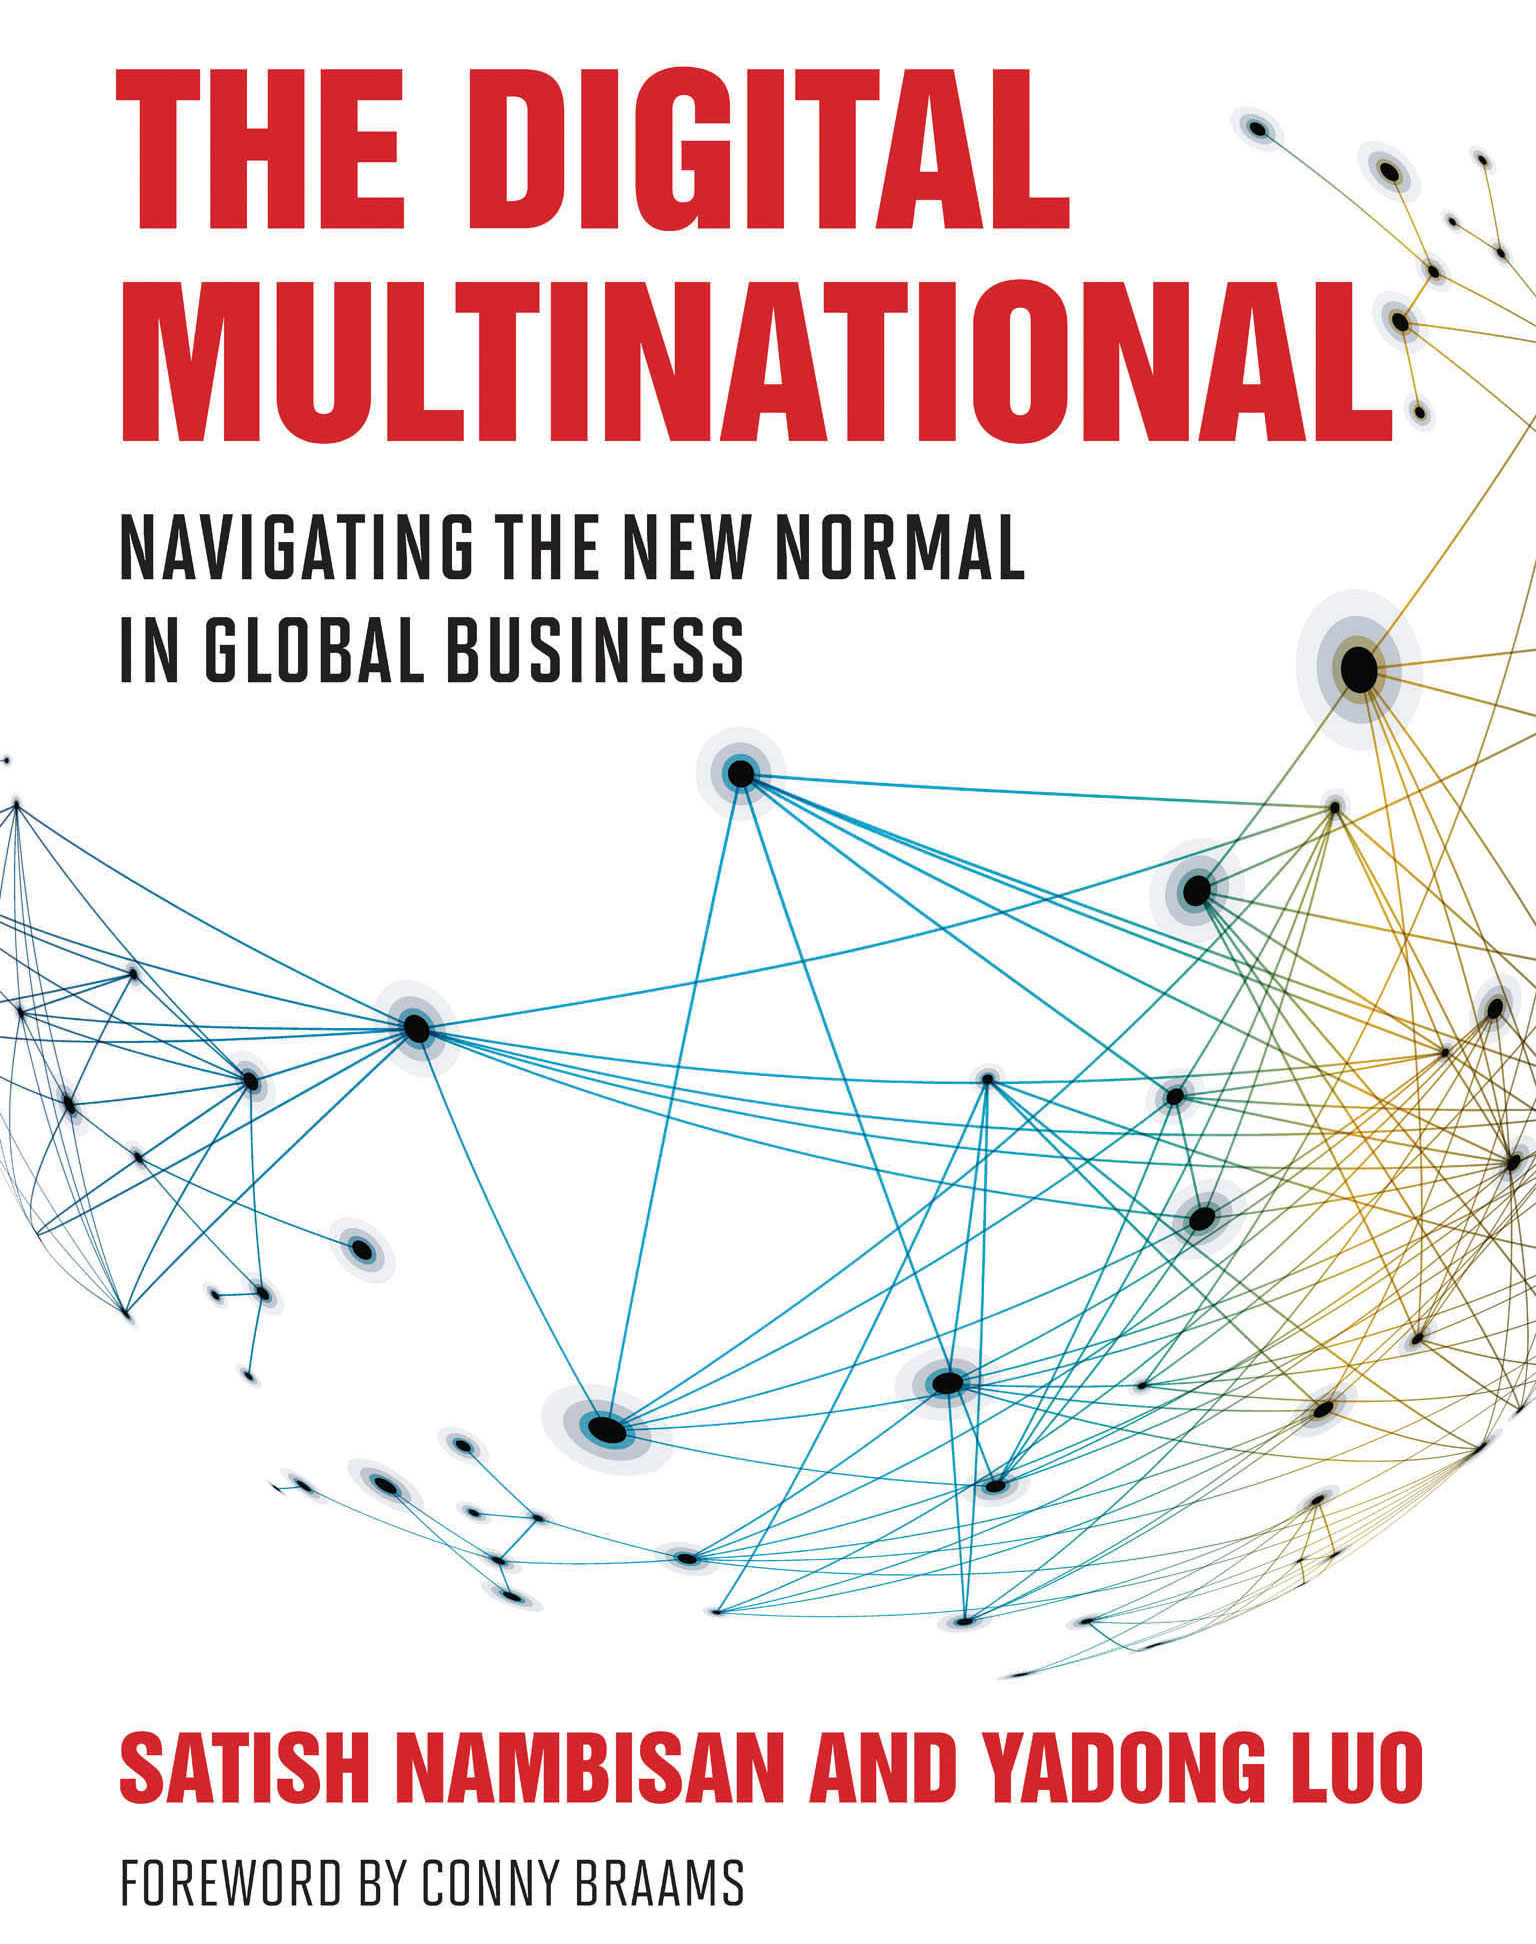 The cover of the book 'The Digital Multinational'